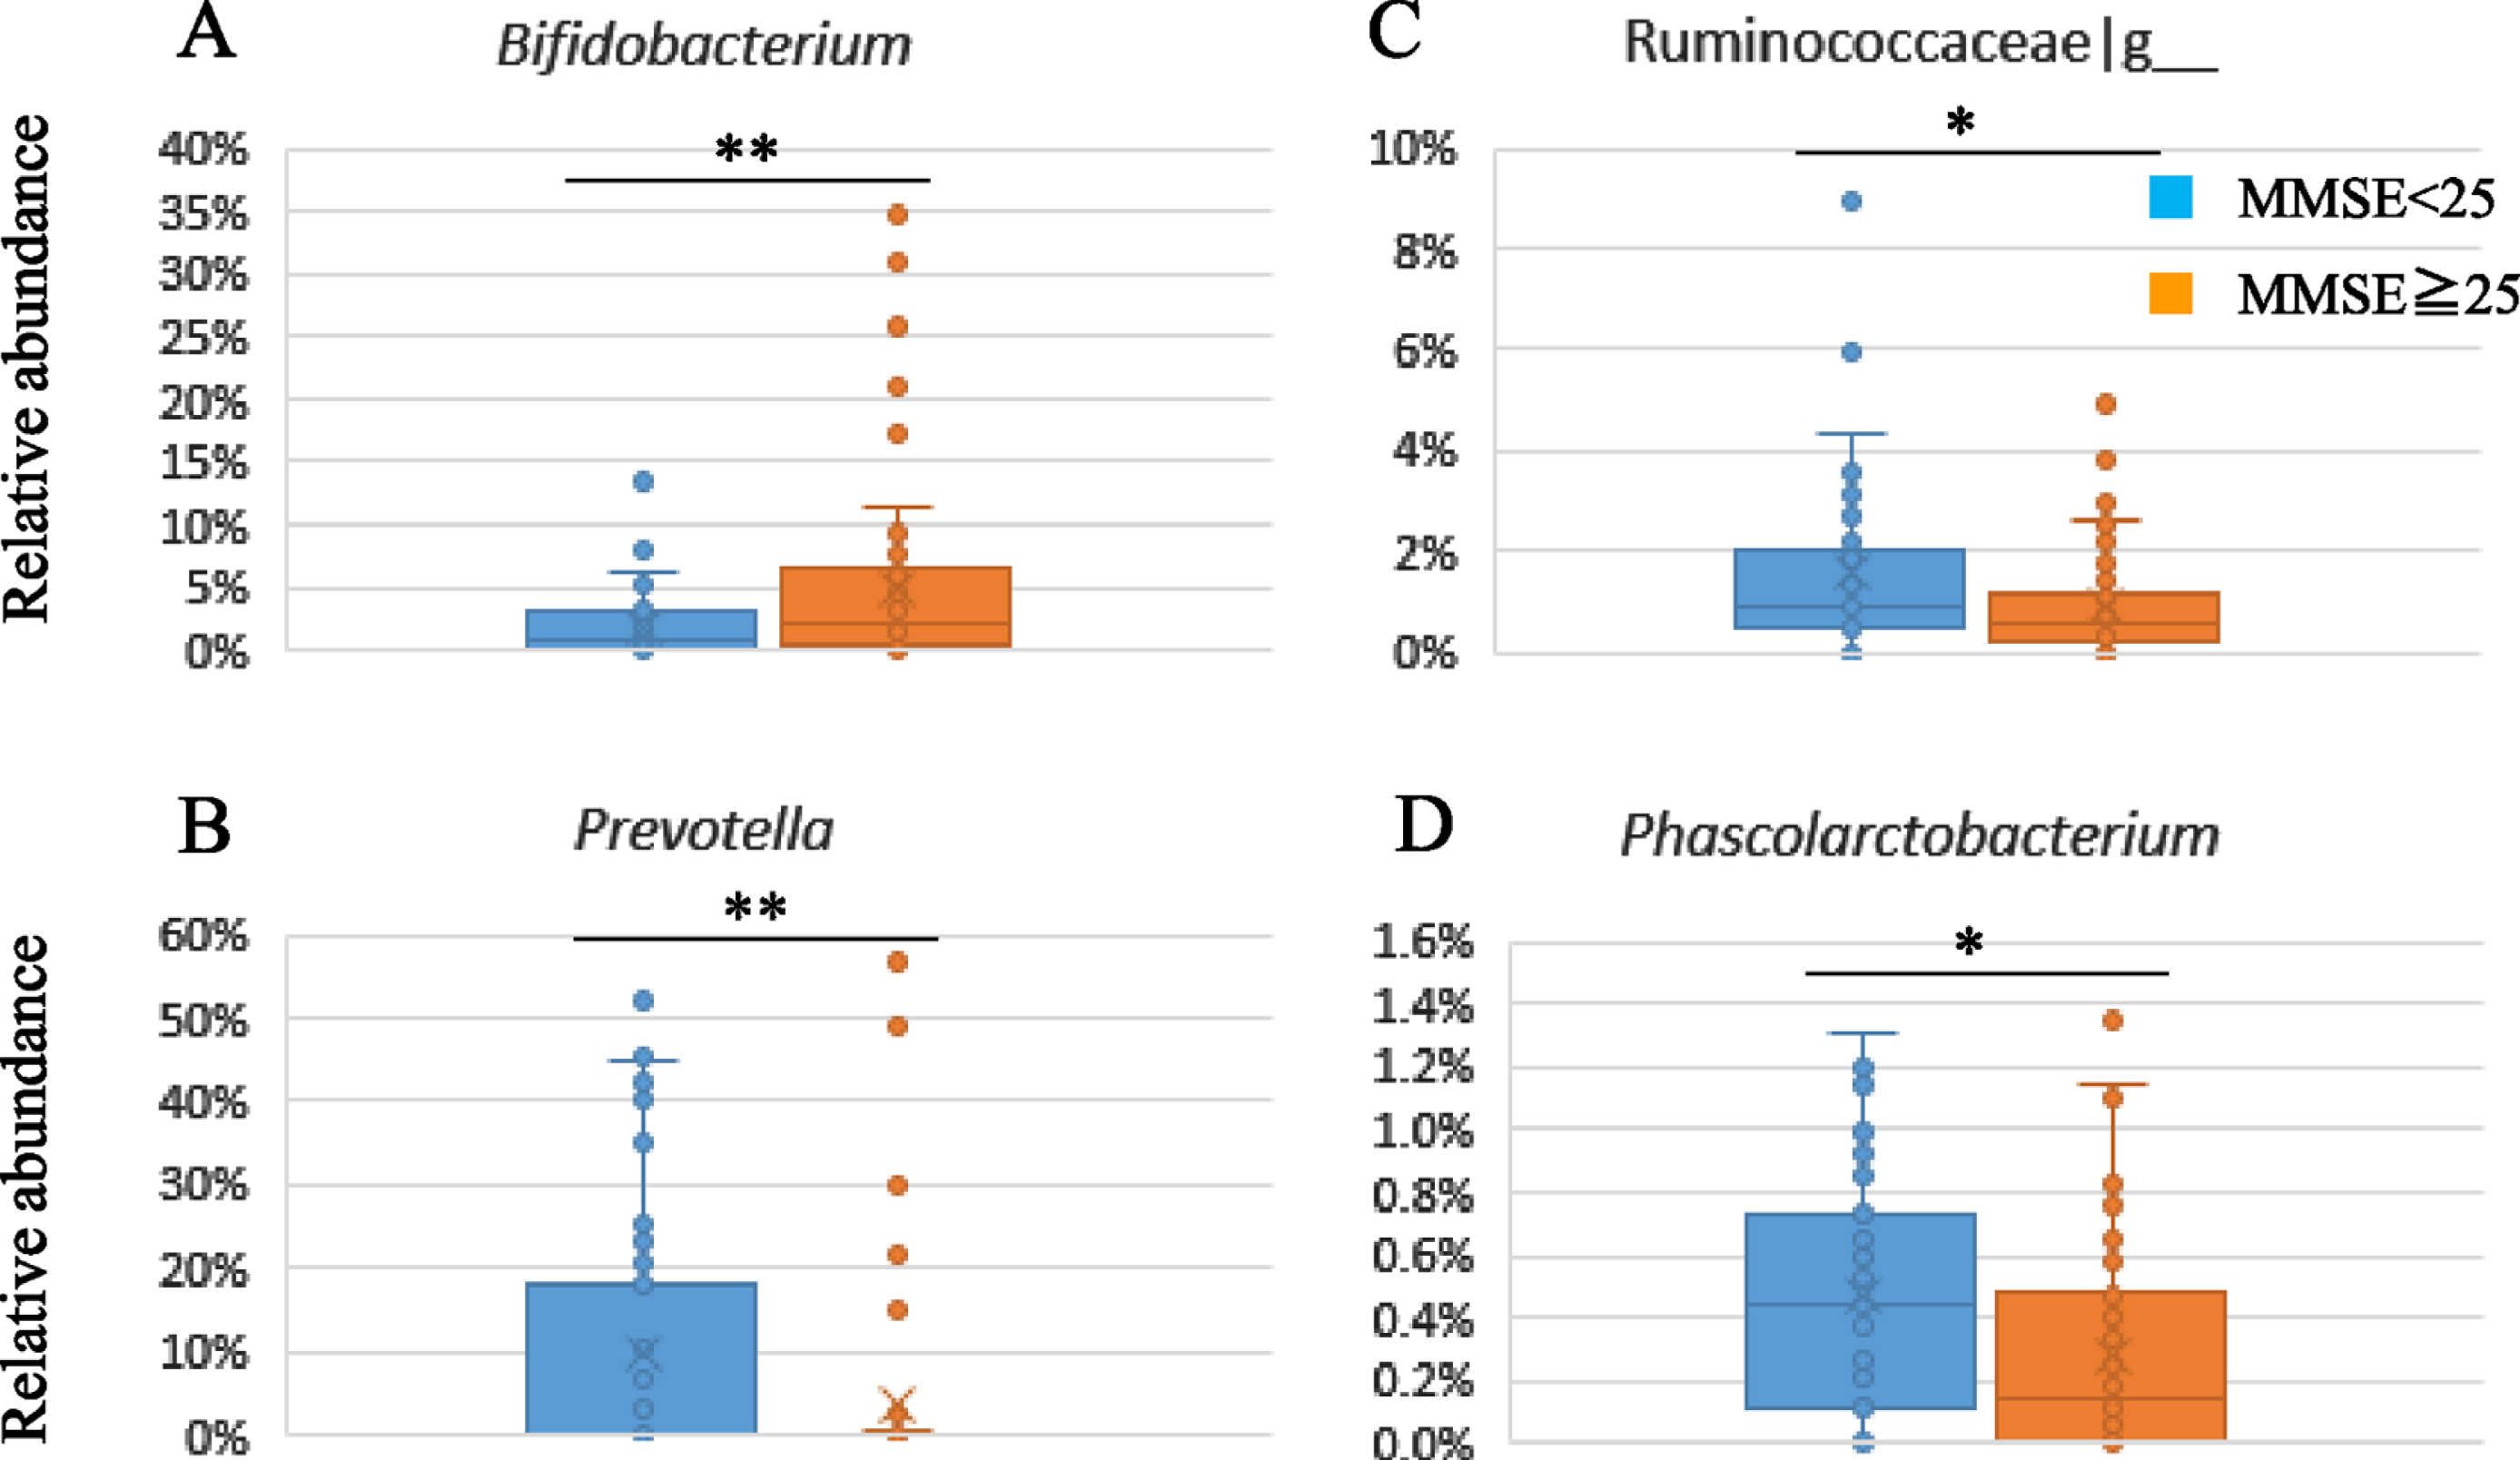 Subgroup analysis of gut microbiota composition by baseline MMSE scores.